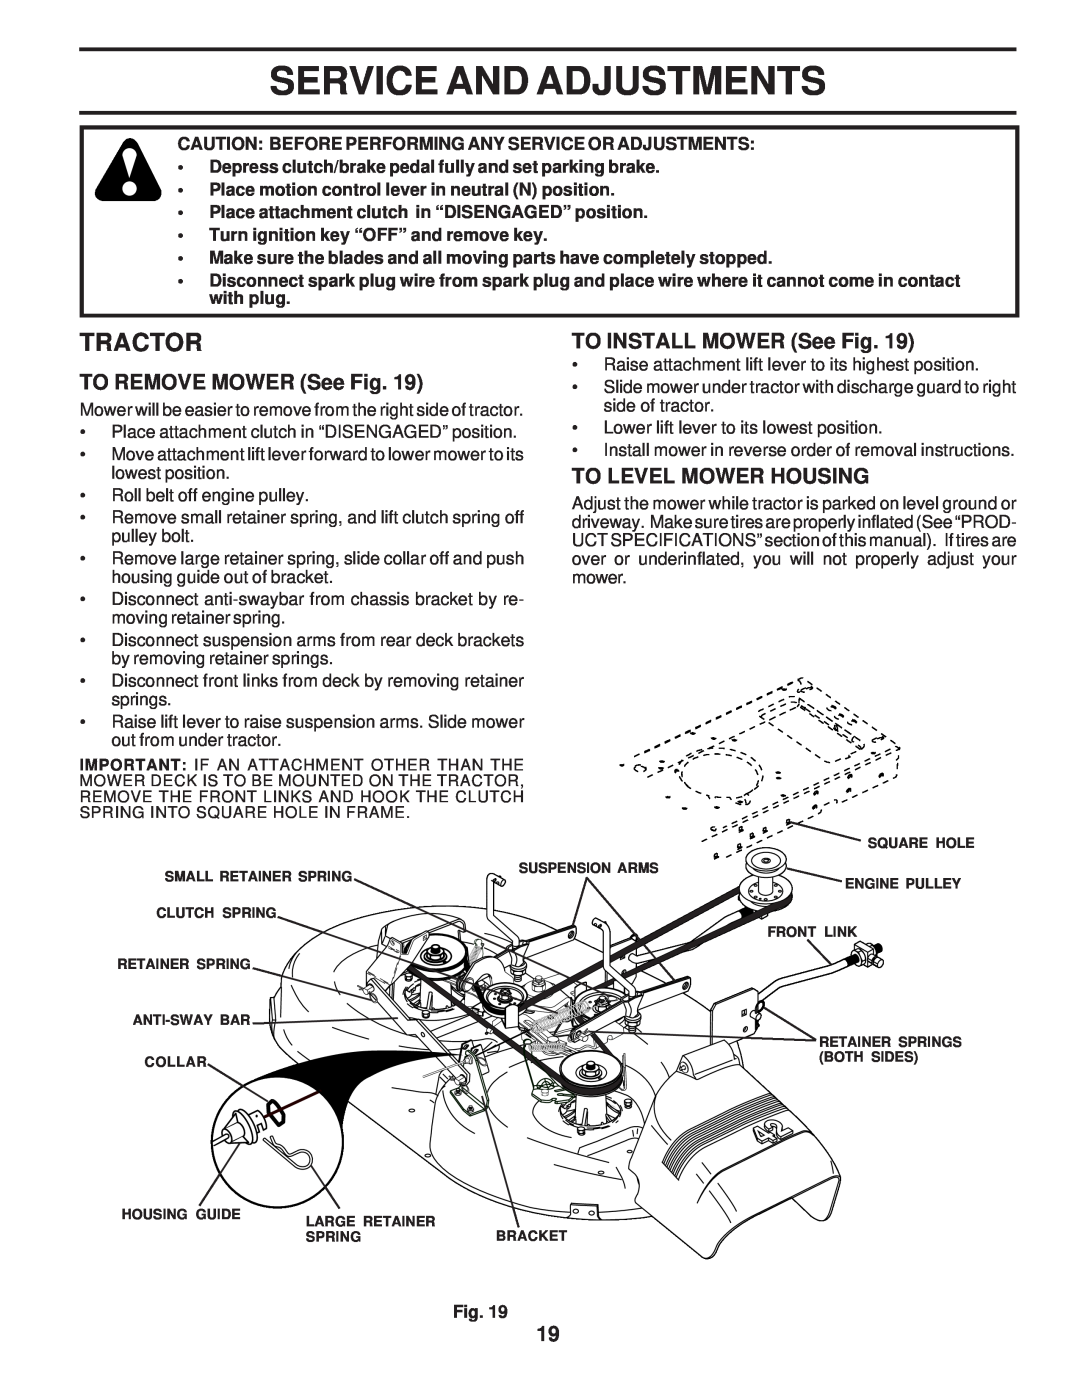 Poulan 173304 Service And Adjustments, TO REMOVE MOWER See Fig, TO INSTALL MOWER See Fig, To Level Mower Housing, Tractor 